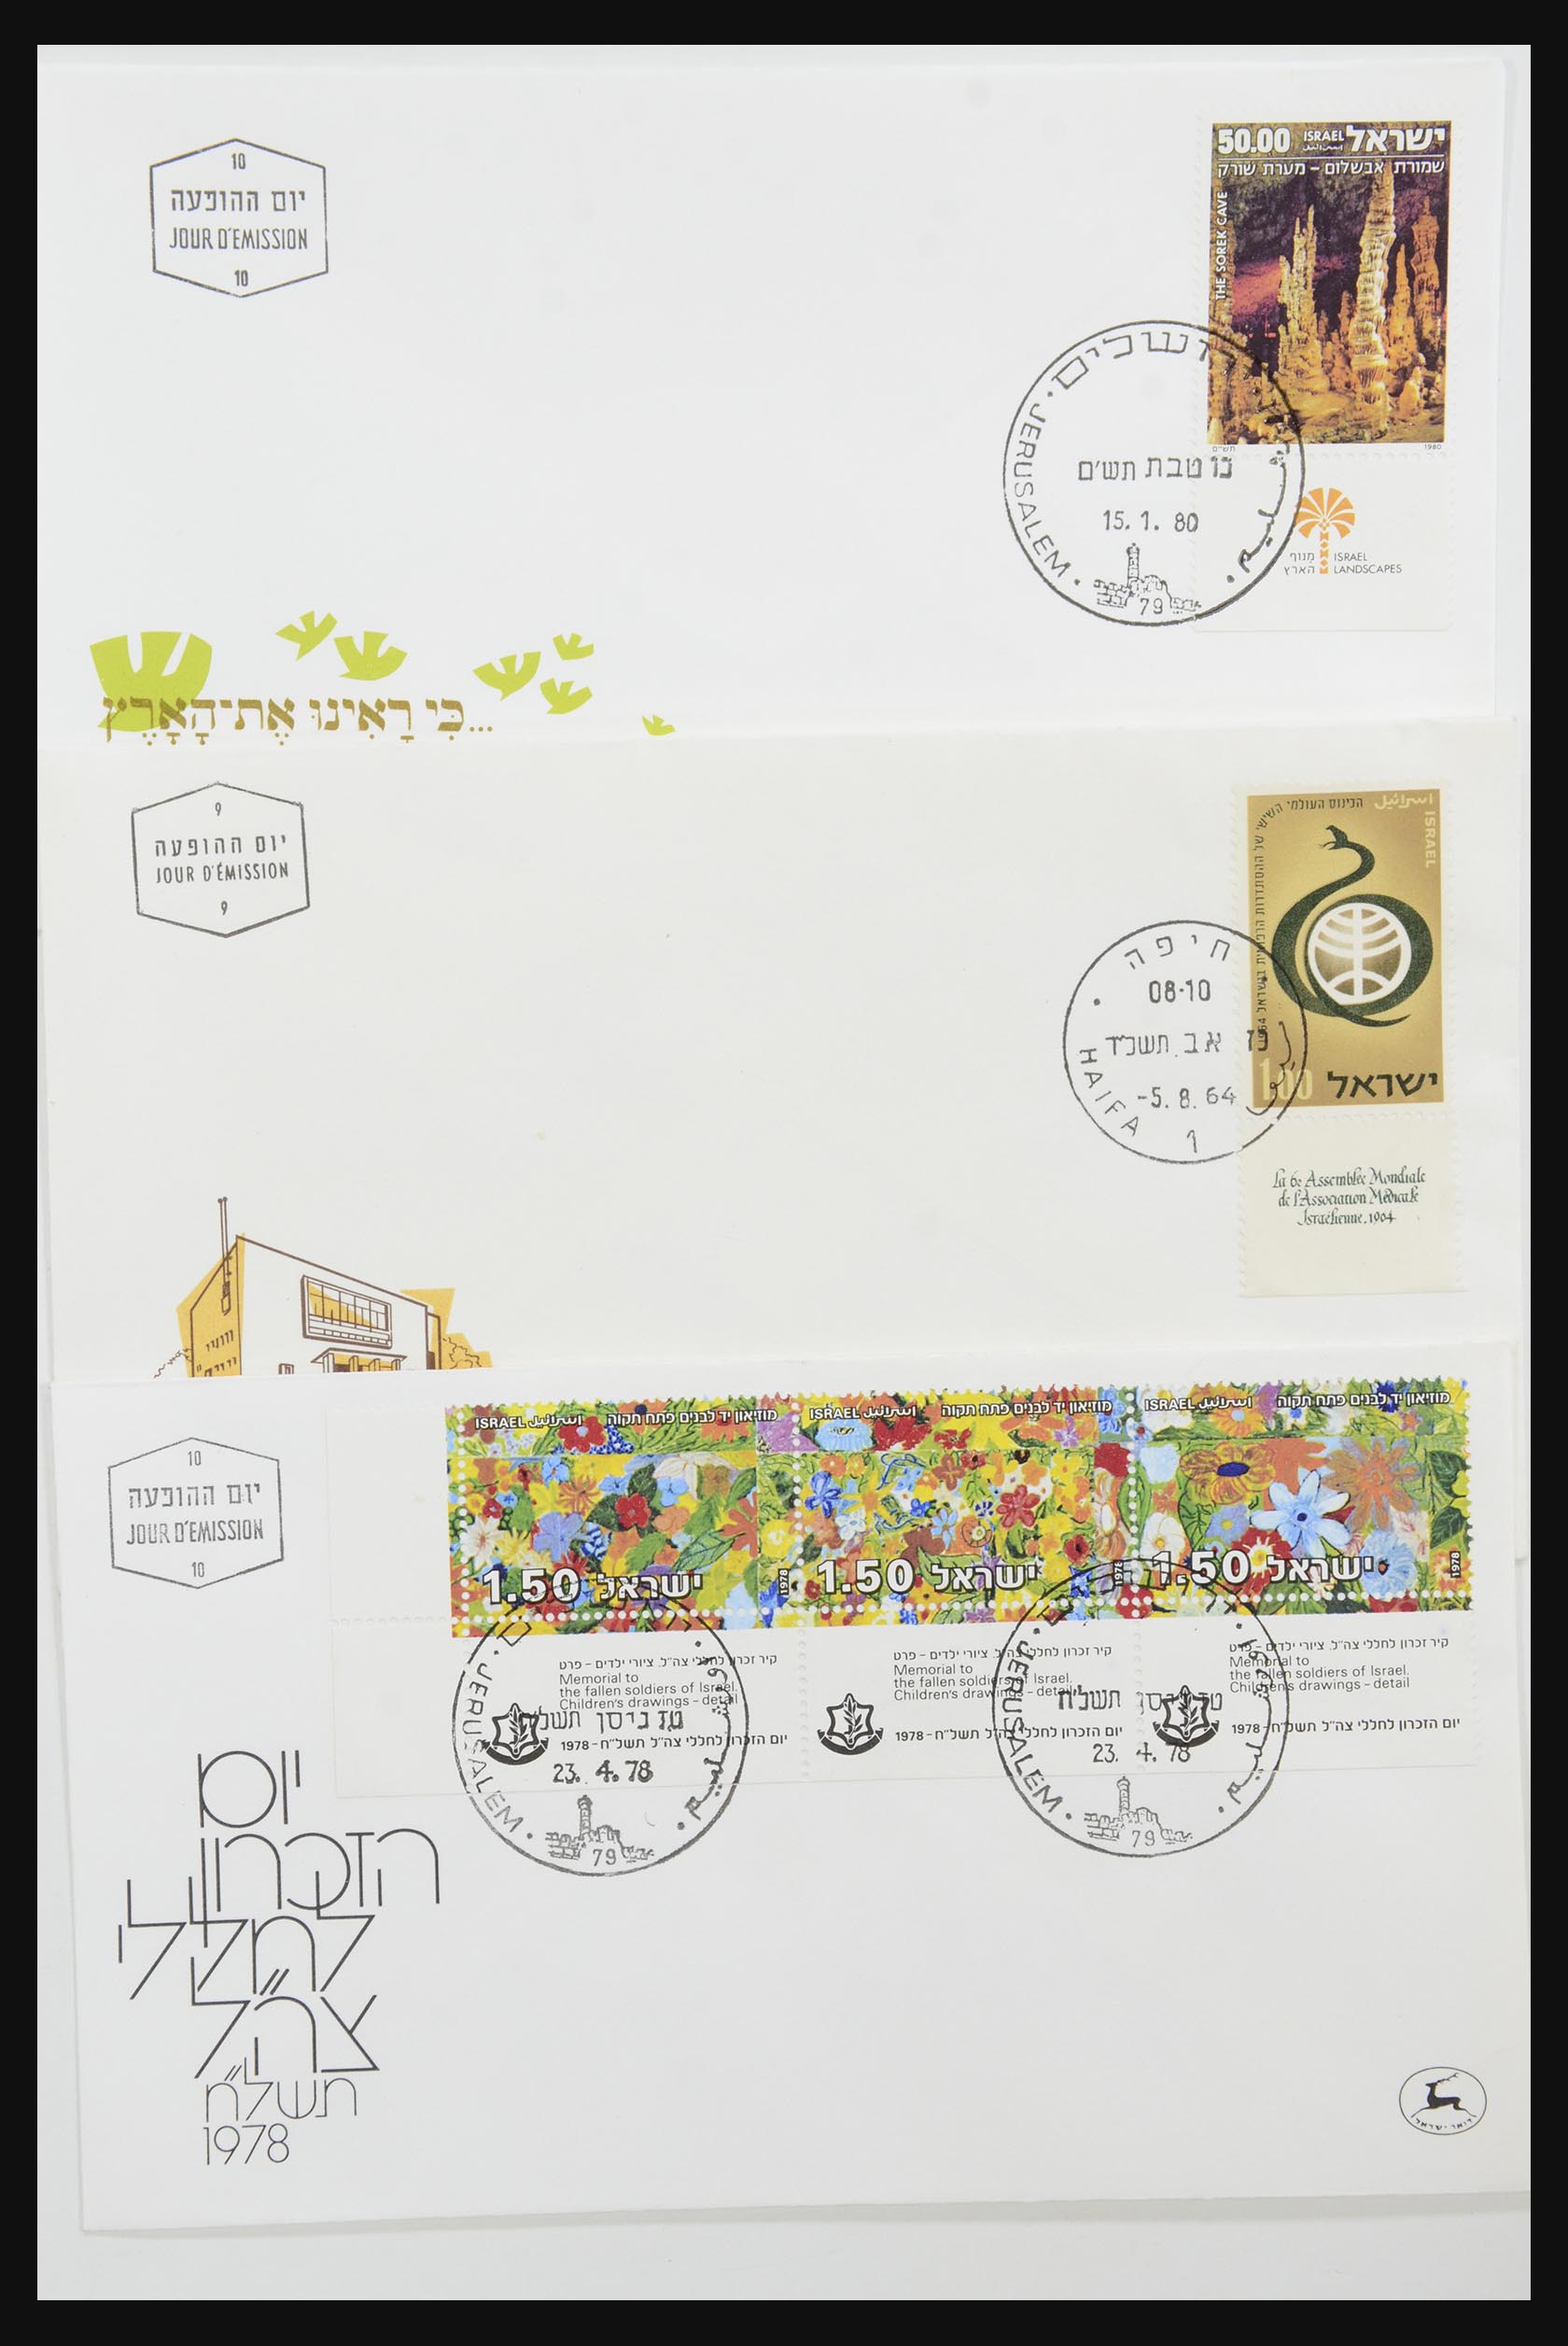 31924 005 - 31924 Israël fdc-collectie 1957-2003.